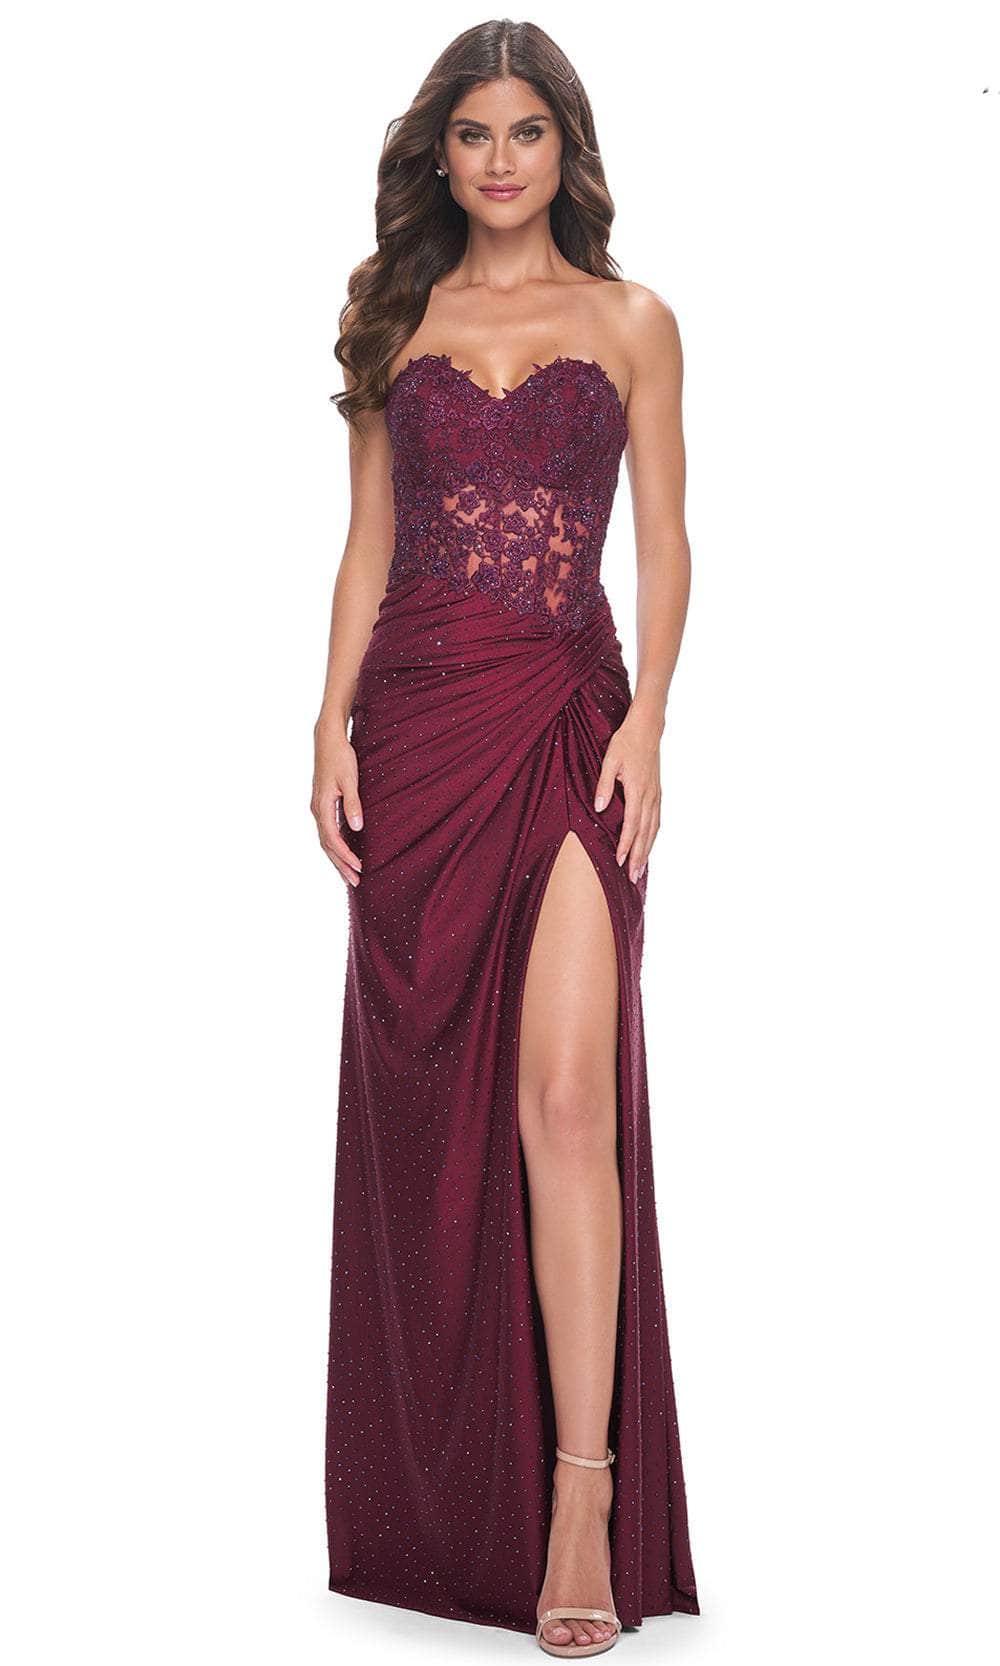 Image of La Femme 32301 - Embroidered Corset Strapless Prom Dress